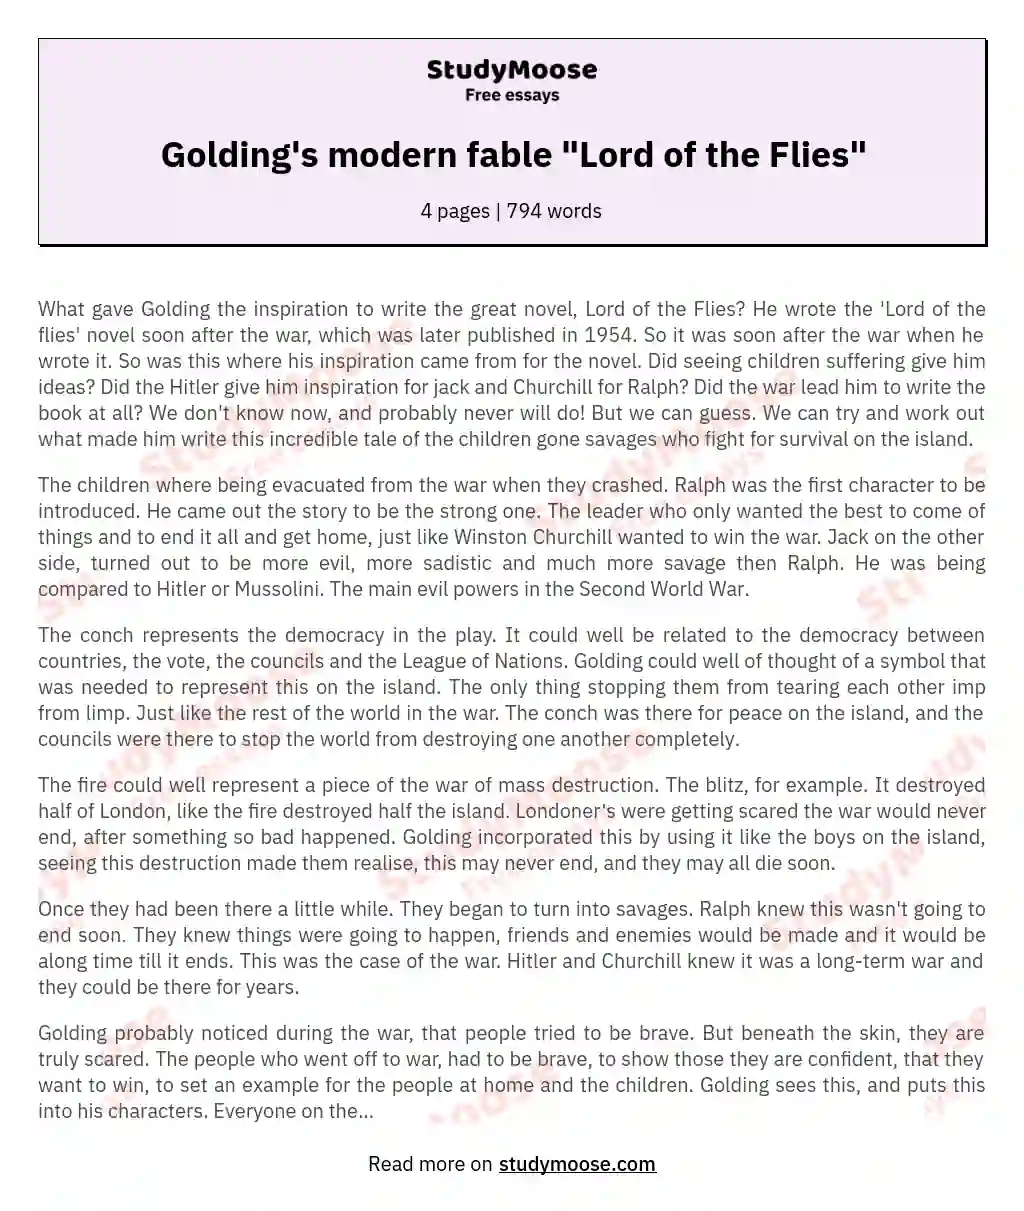 Golding's modern fable "Lord of the Flies" essay